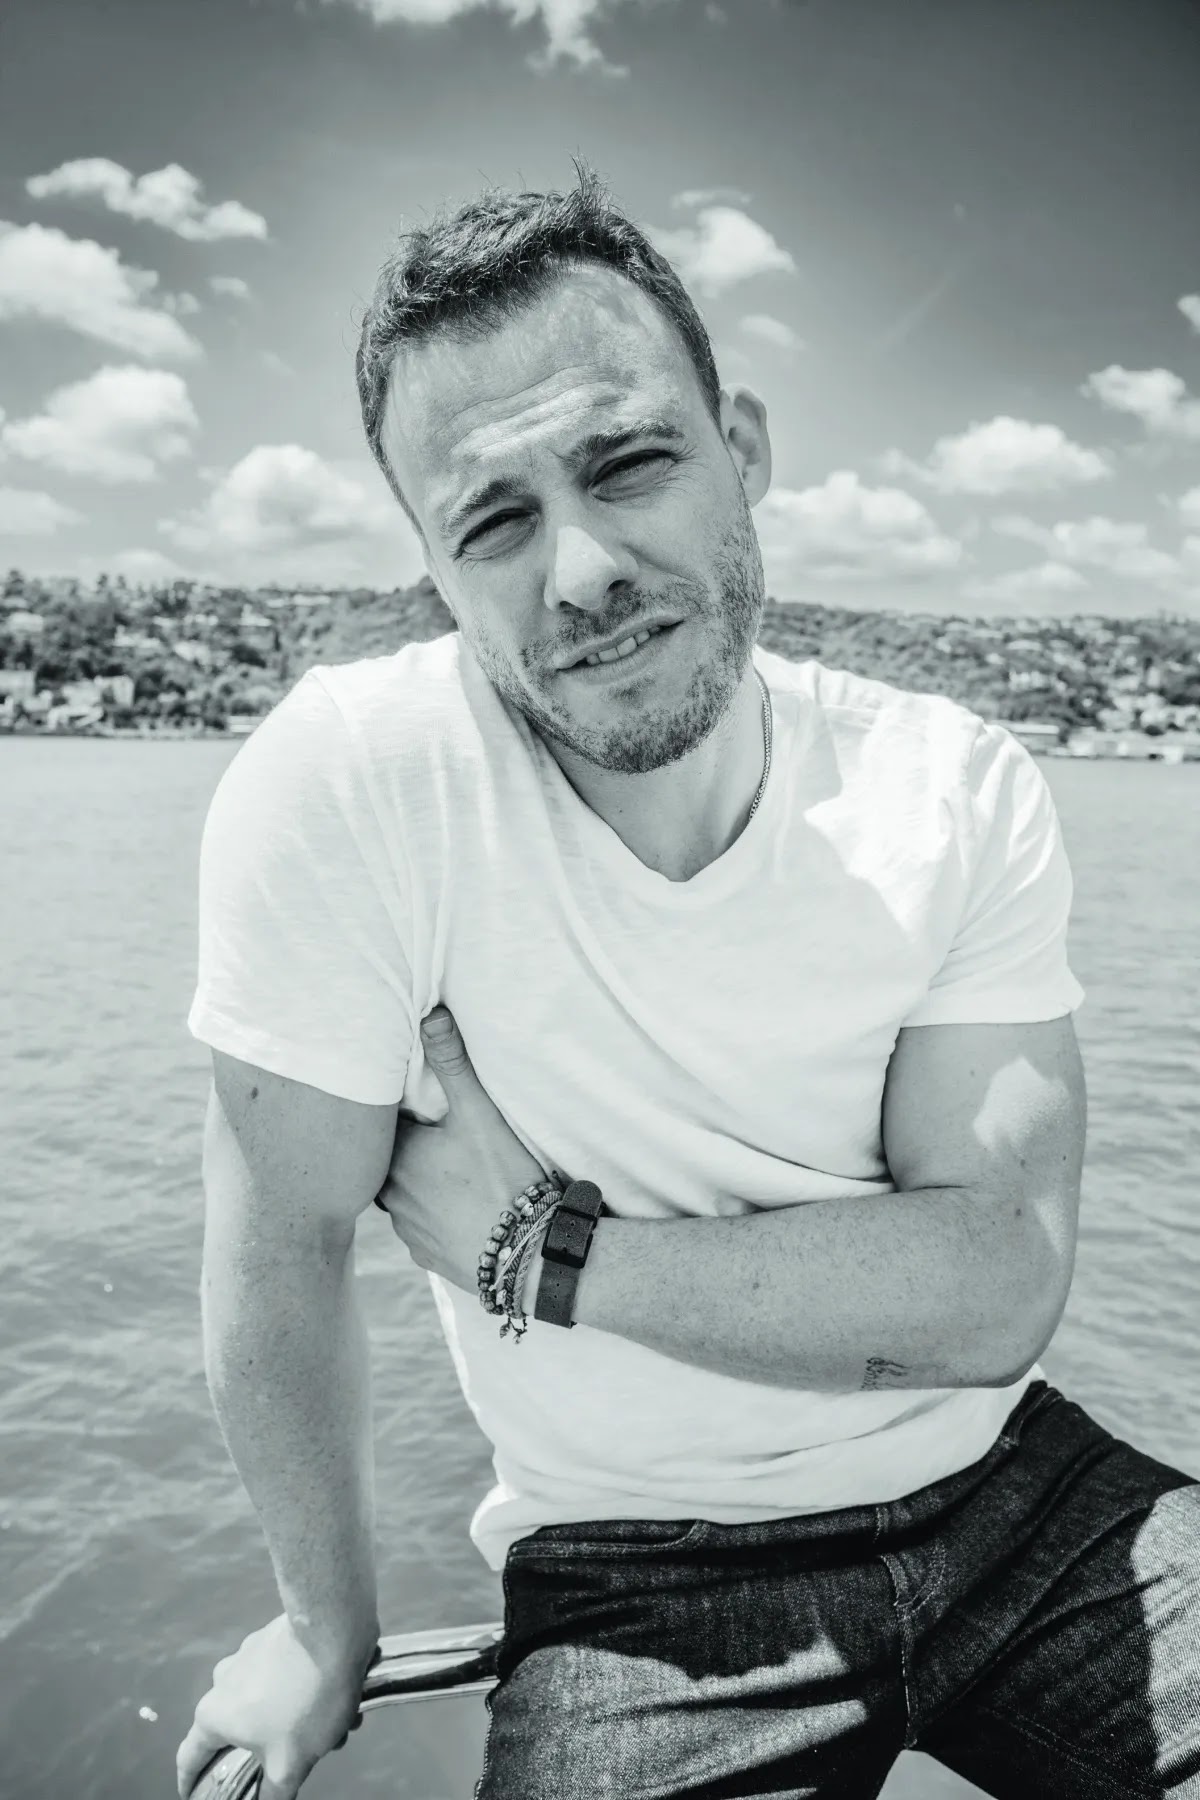 Kerem Bürsin: What's happening with Turkish television is wonderful. Being global means being able to work and grow from your own country.(Vanity Fair full interview)